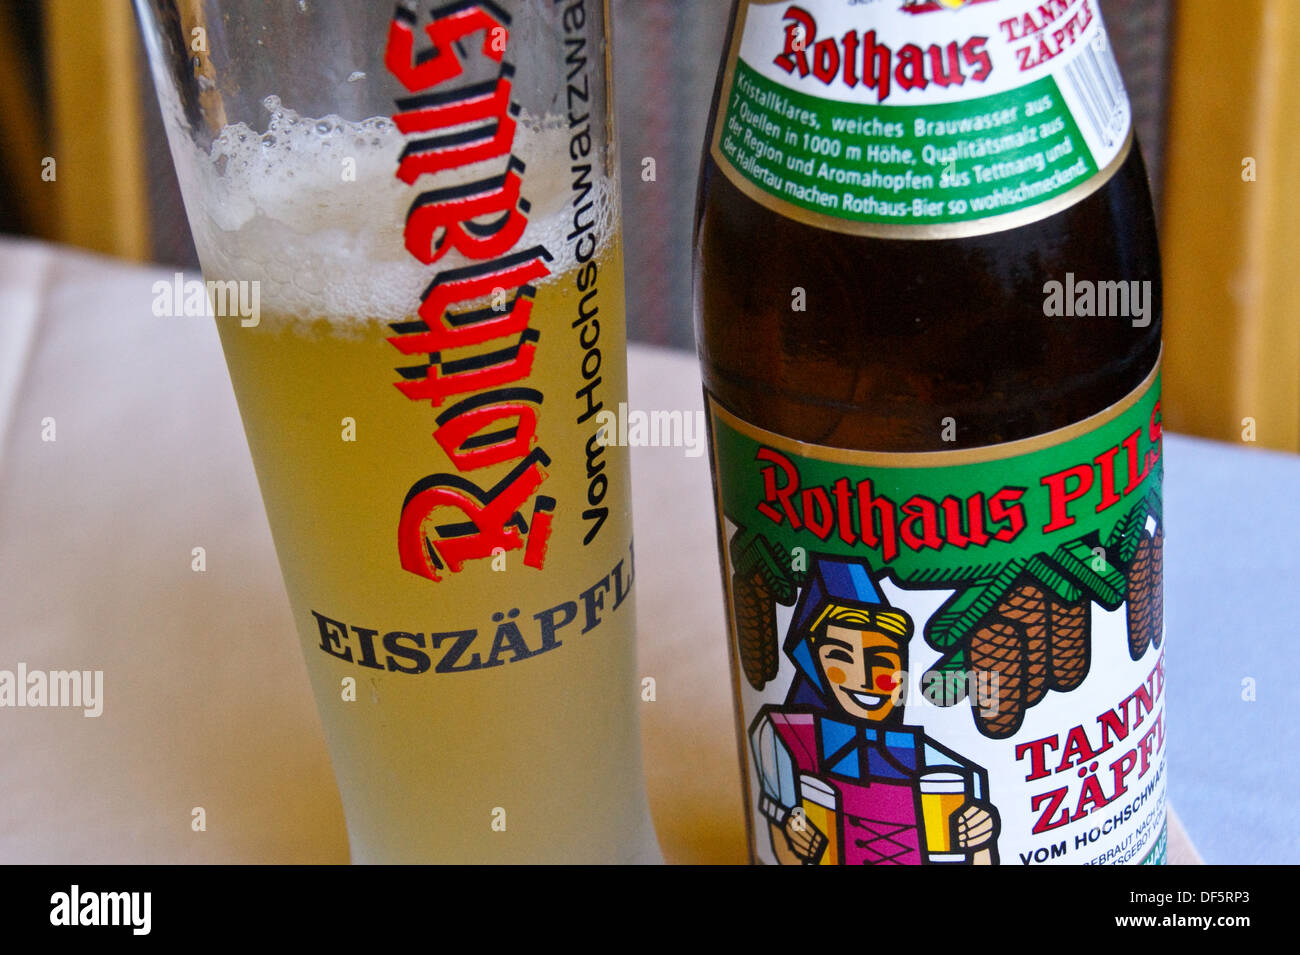 A bottle and glass of  Rothaus Tannen-Zapfle beer, Stuttgart, Baden-Wuerttemberg, Germany Stock Photo